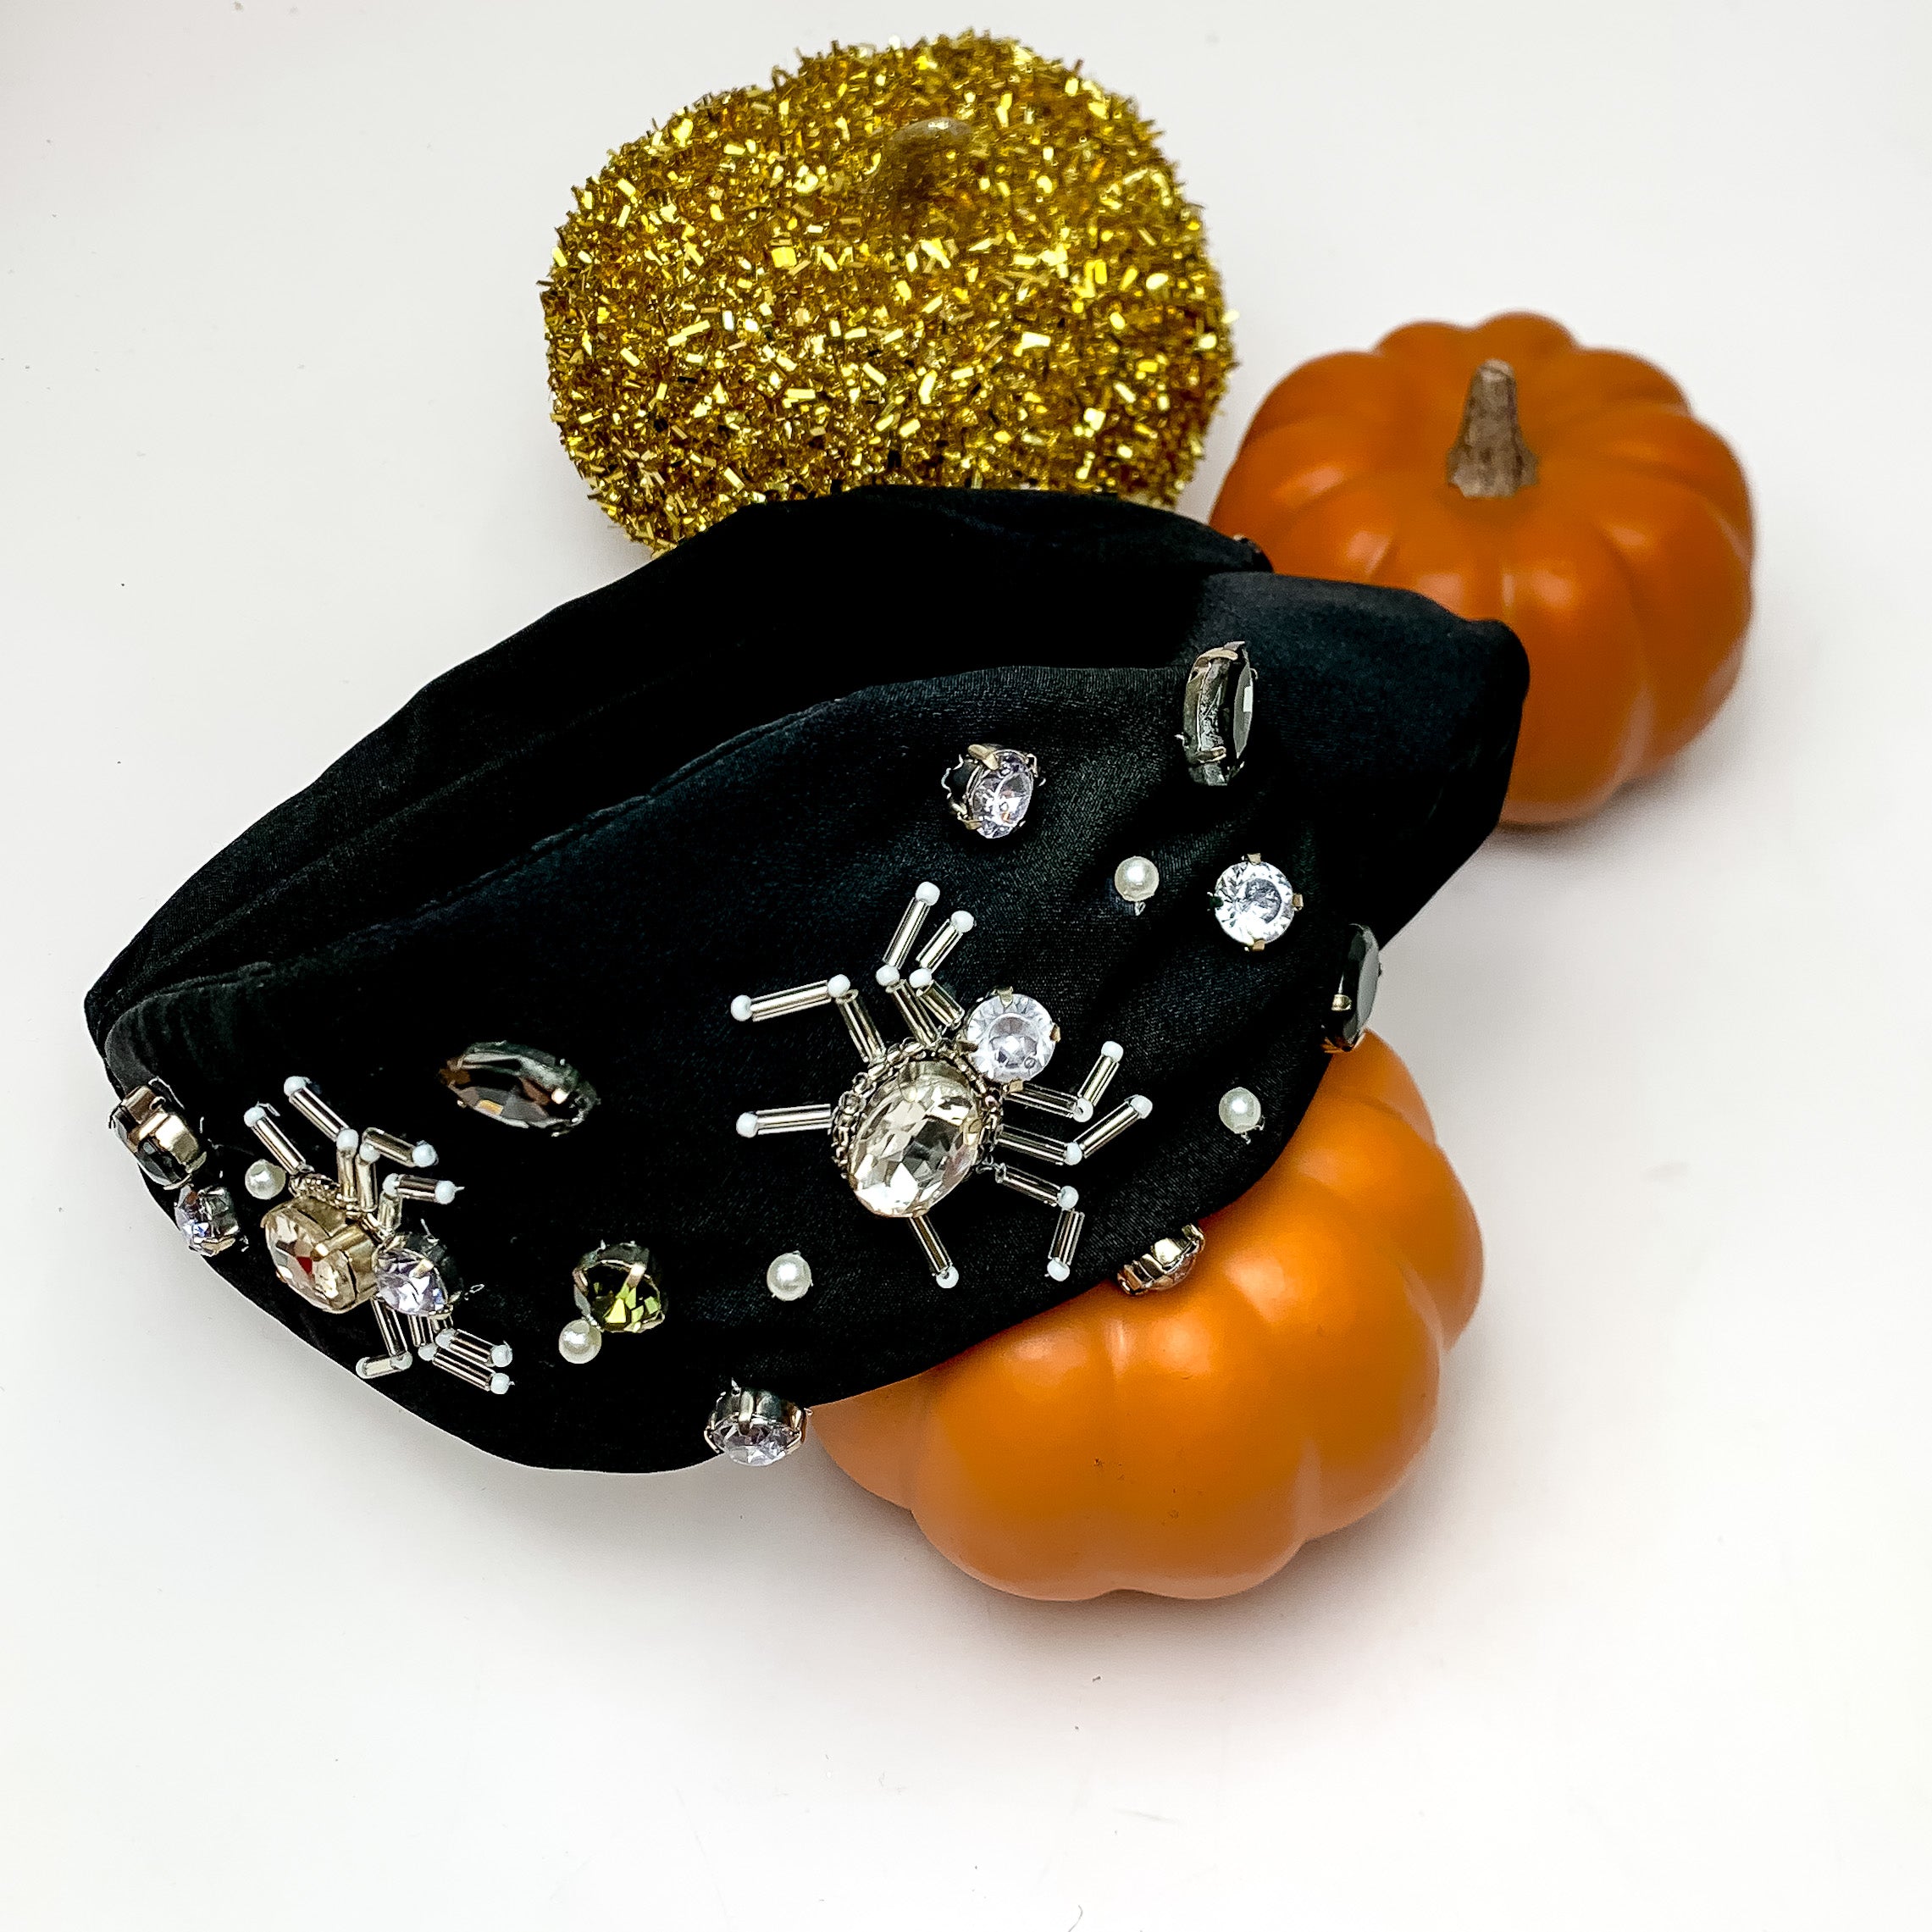 Halloween Clear Crystal Spider Headband in Black. This headband is pictured next to decorative pumpkins.